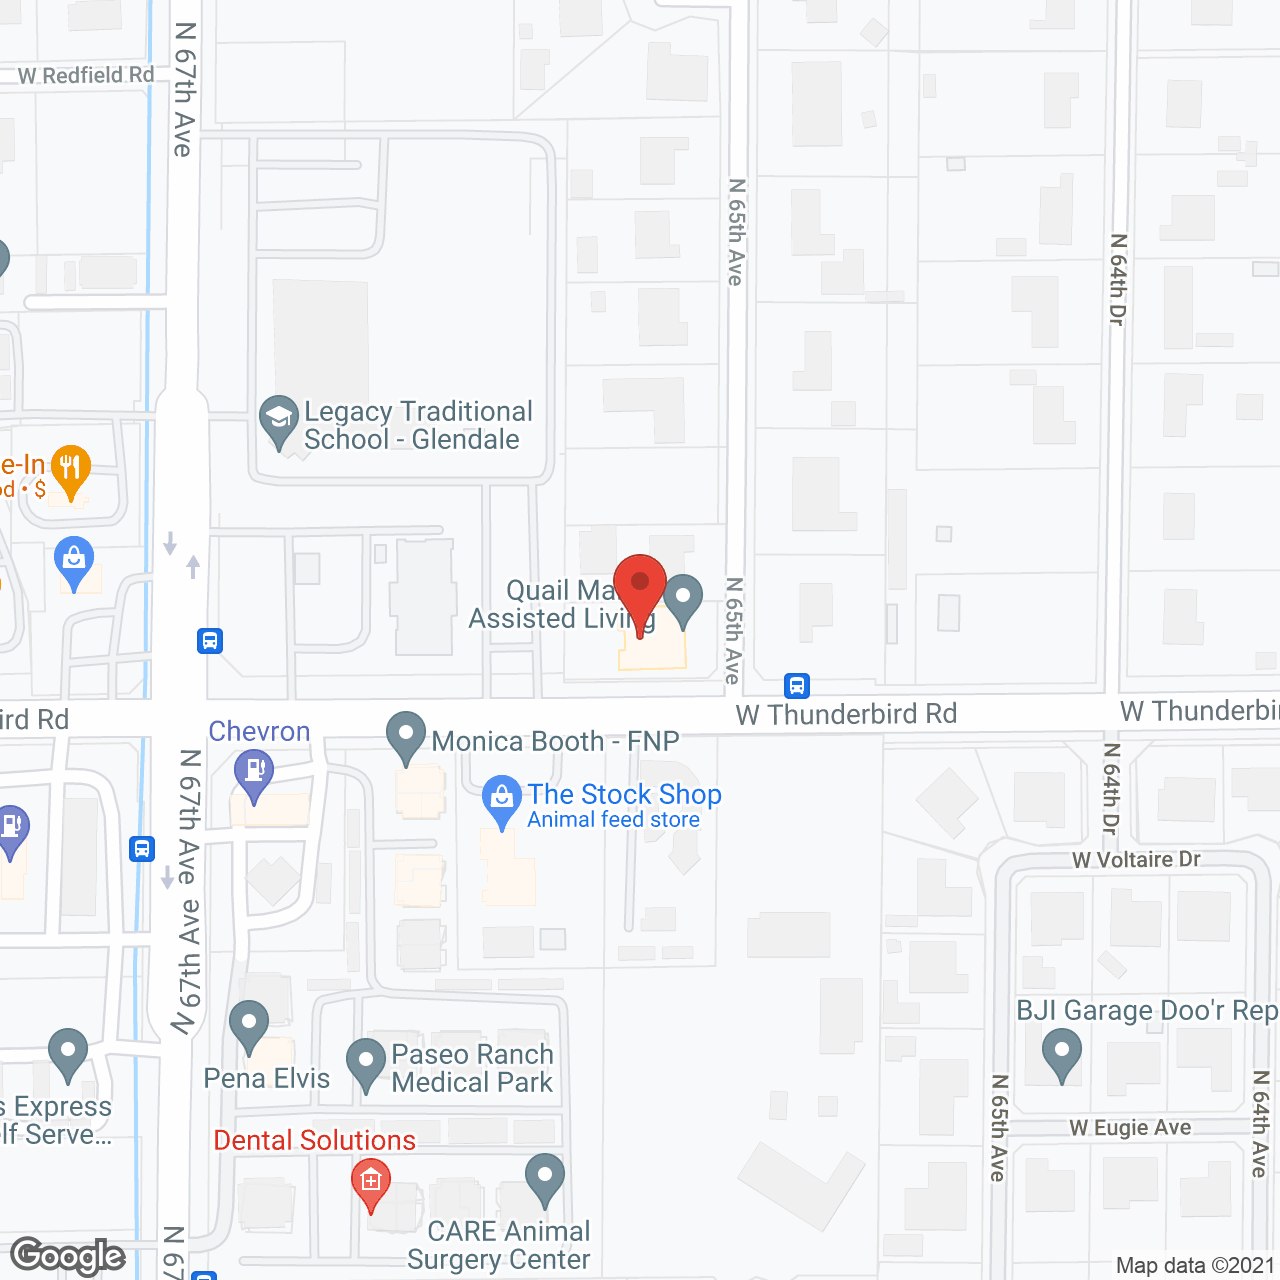 Quail Manor Assisted Living in google map